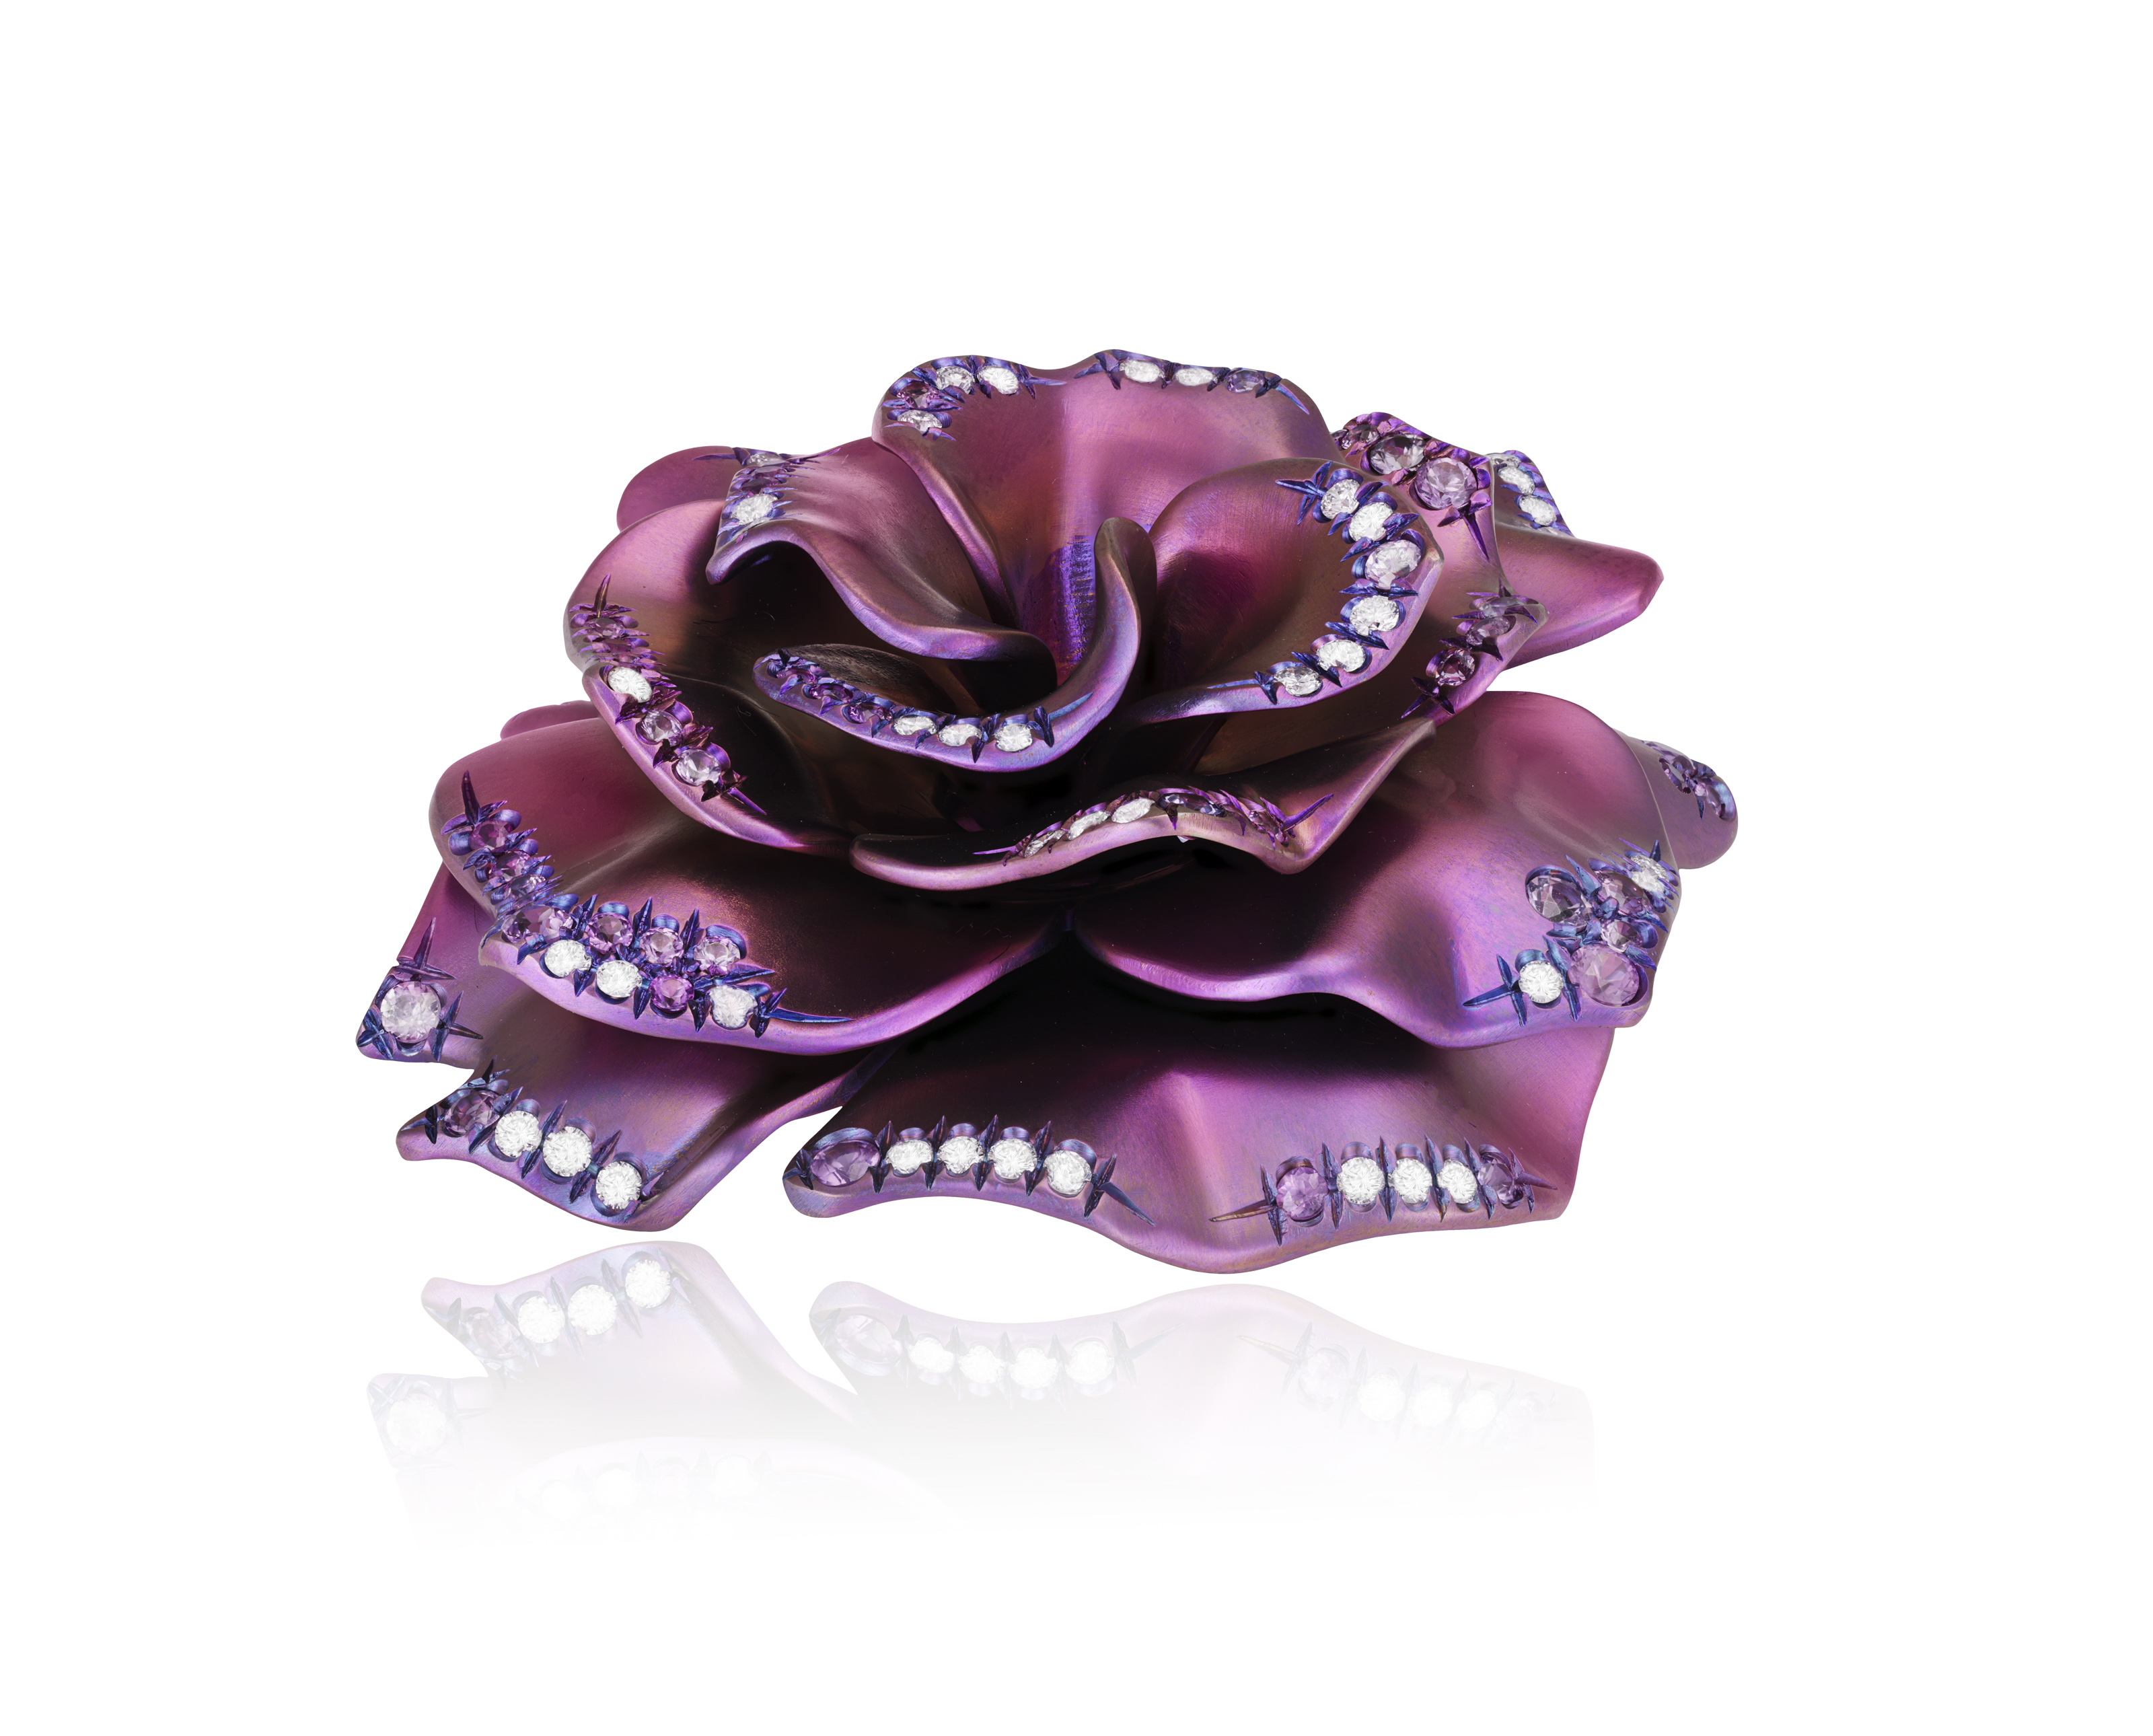 A HANDMADE GEM-SET AND TITANIUM 'OUR LADY OF GUADALUPE' ROSE PENDANT/BROOCH, BY MARGHERITA - Image 3 of 9